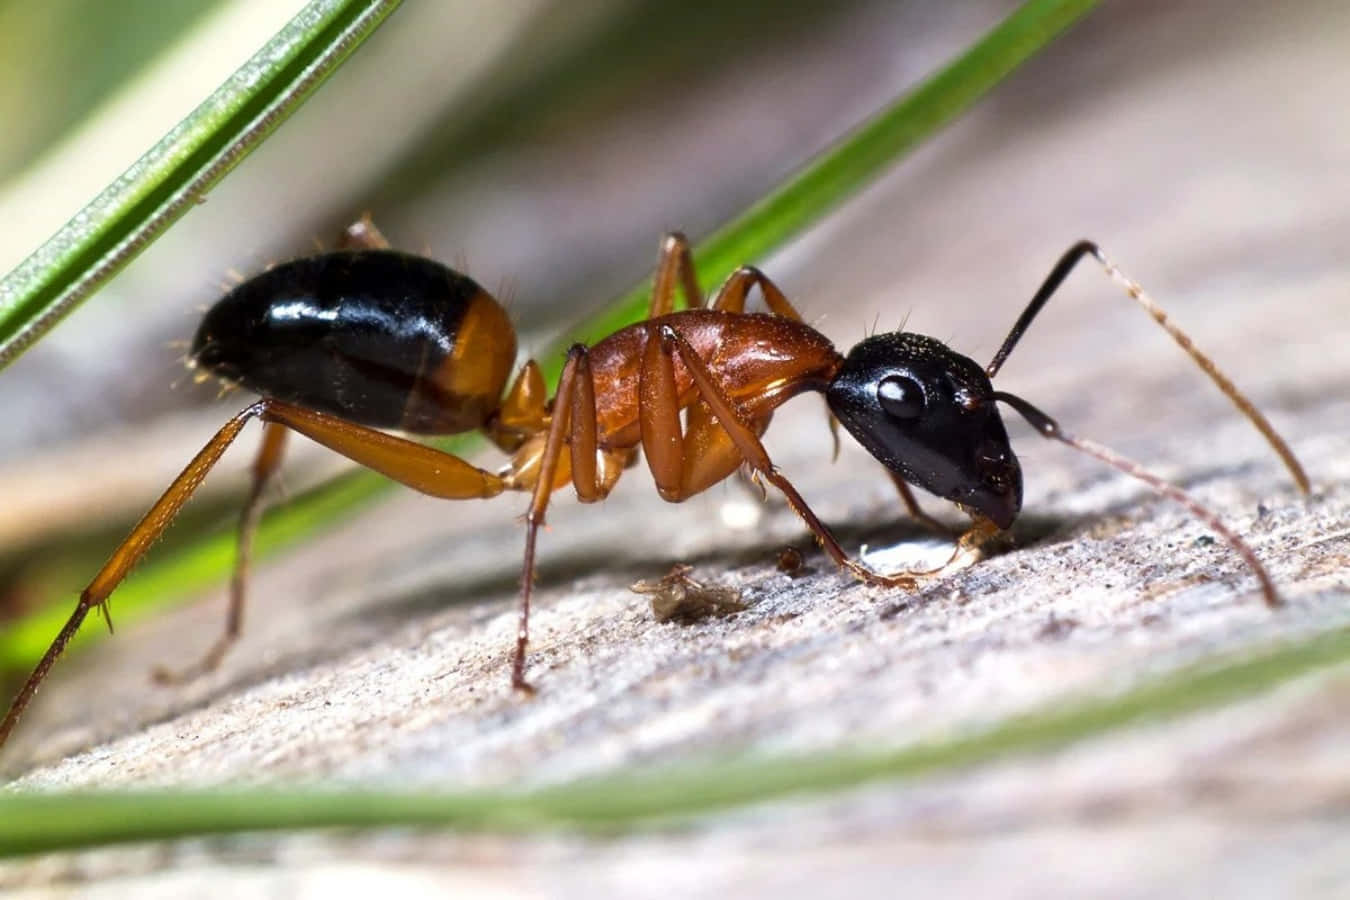 A close up view of an ant crawling on a branch